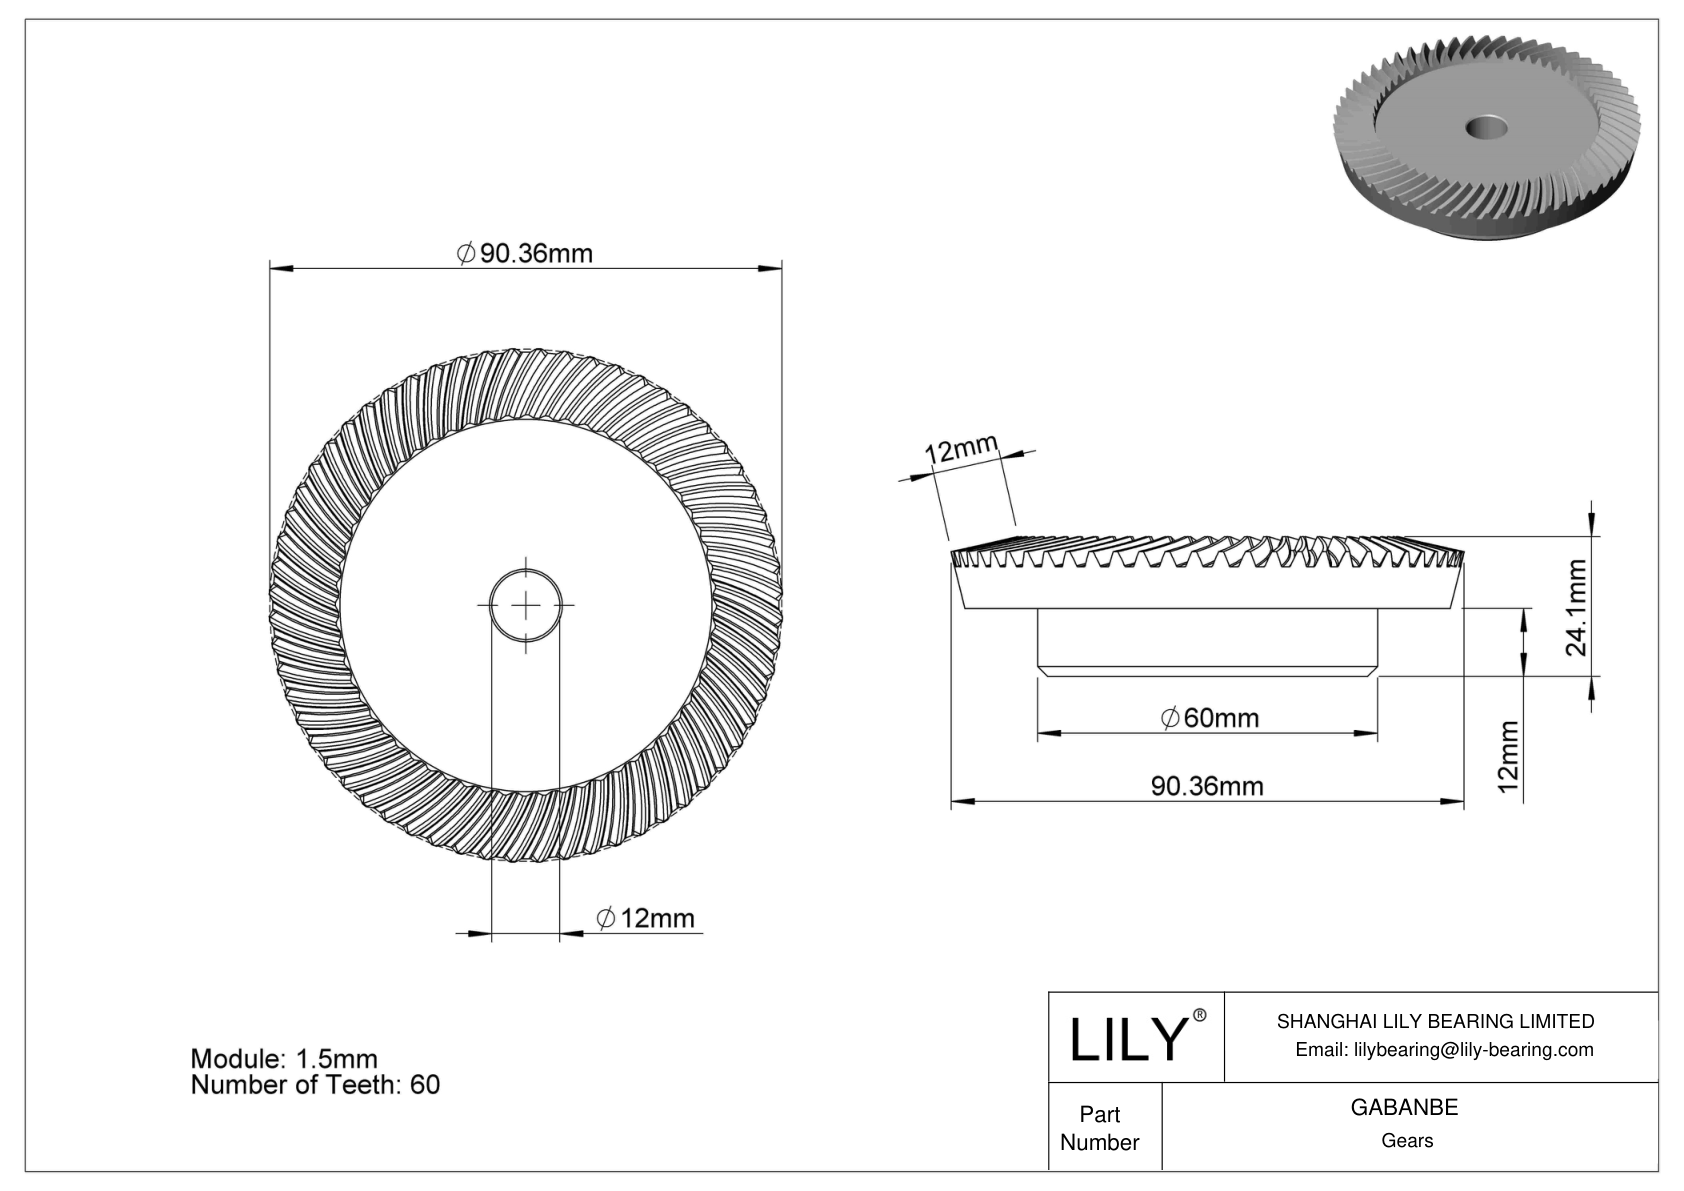 GABANBE Gears cad drawing